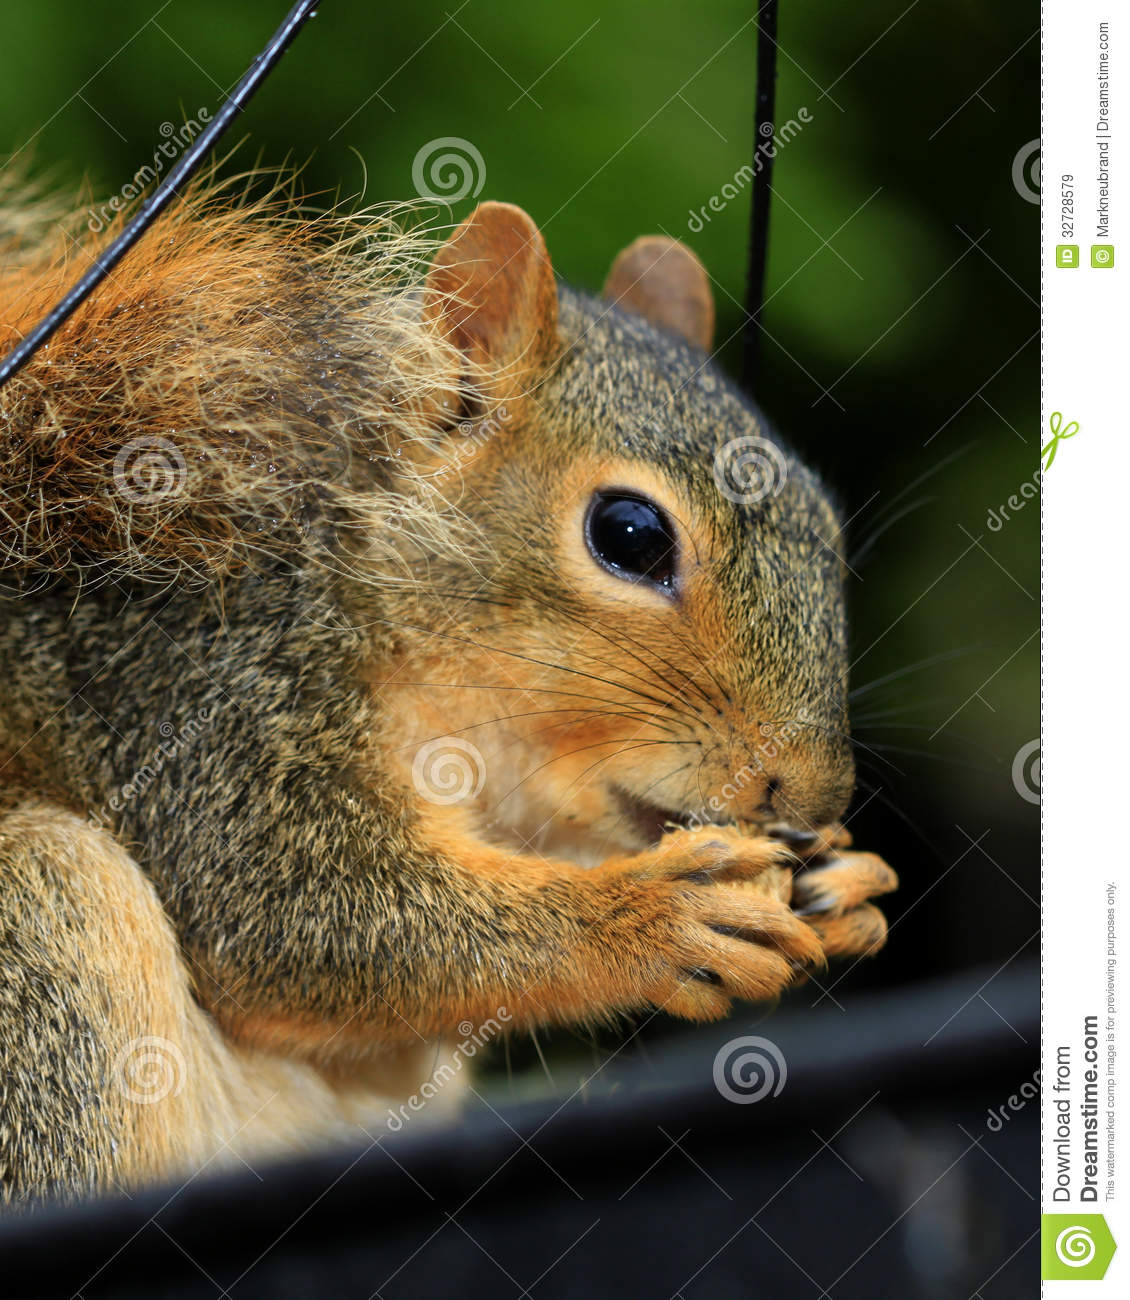 Squirrel Teeth Royalty Free Stock Images   Image  32728579